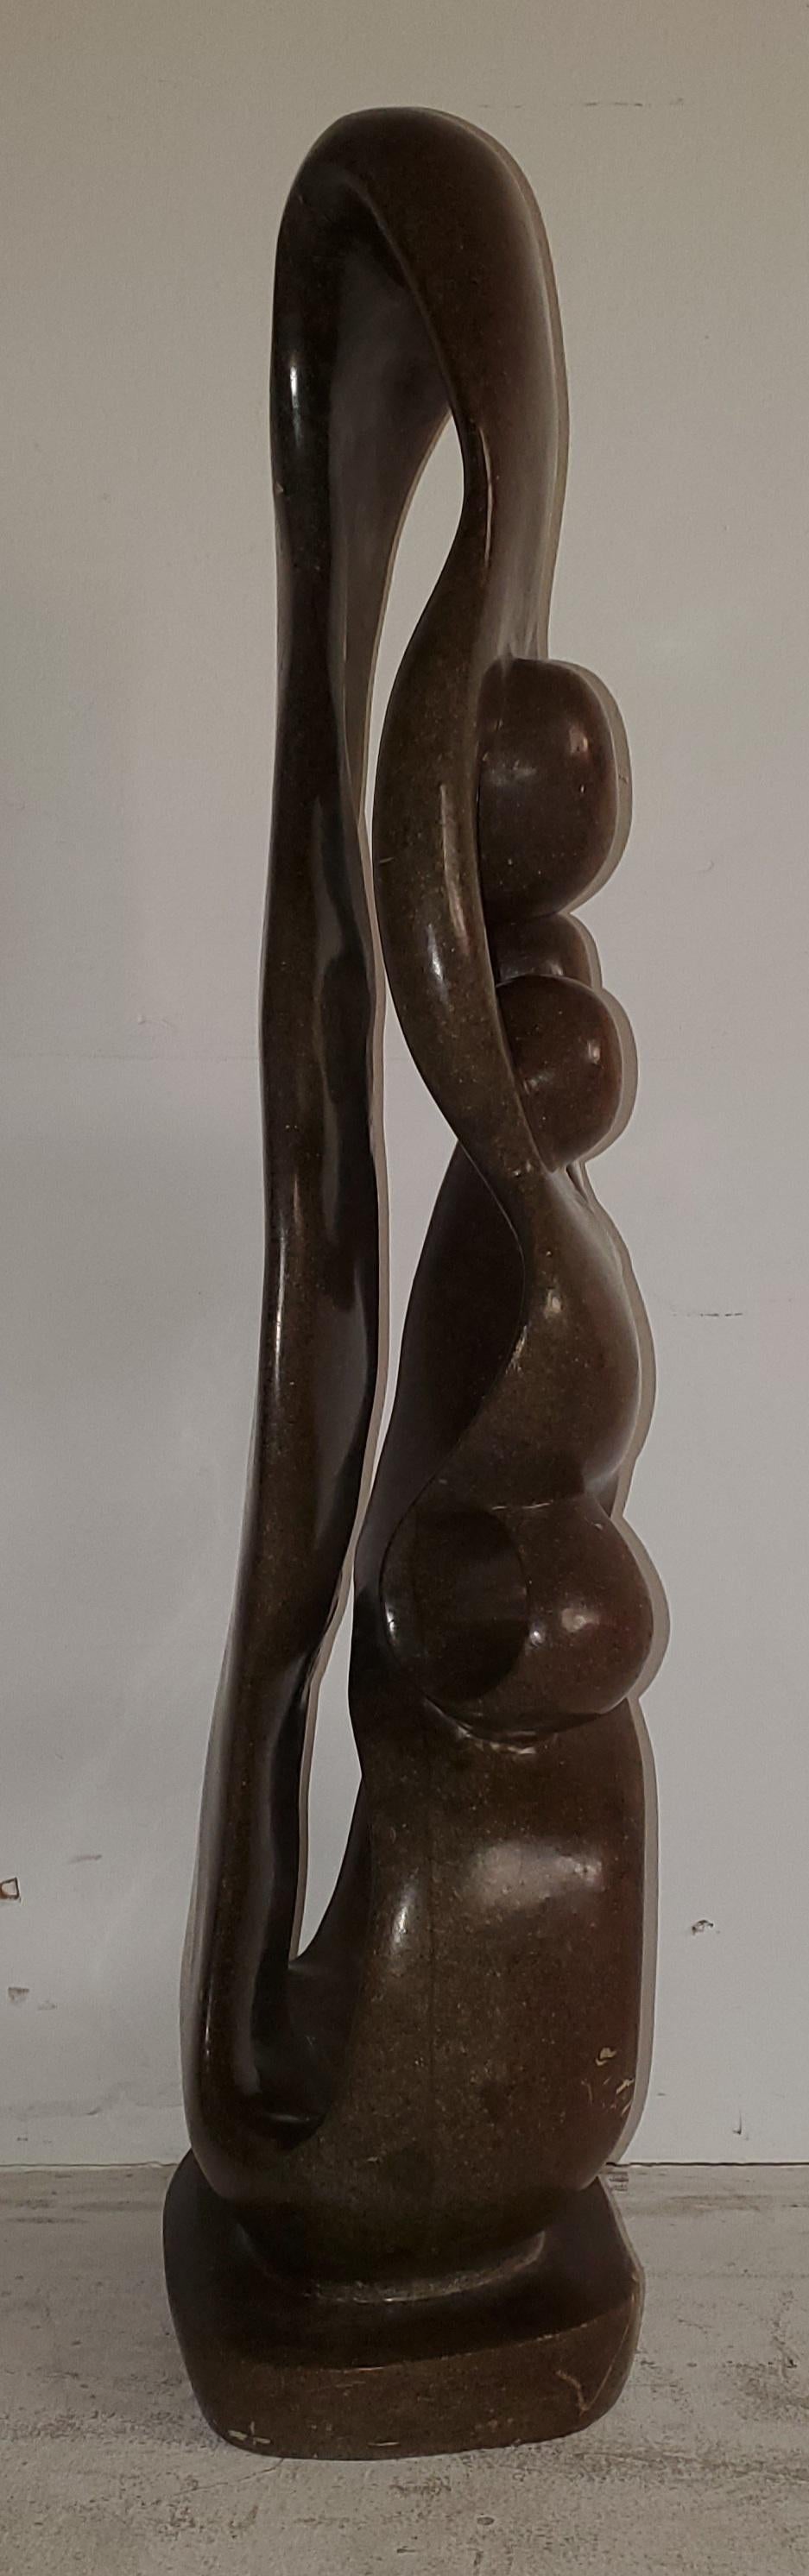 Beautiful sculpture of a family unity and circle of trust in an Architectural free form. This 29inch sculpture is made from stone and is heavy. Great base and sturdy. A great piece with life.